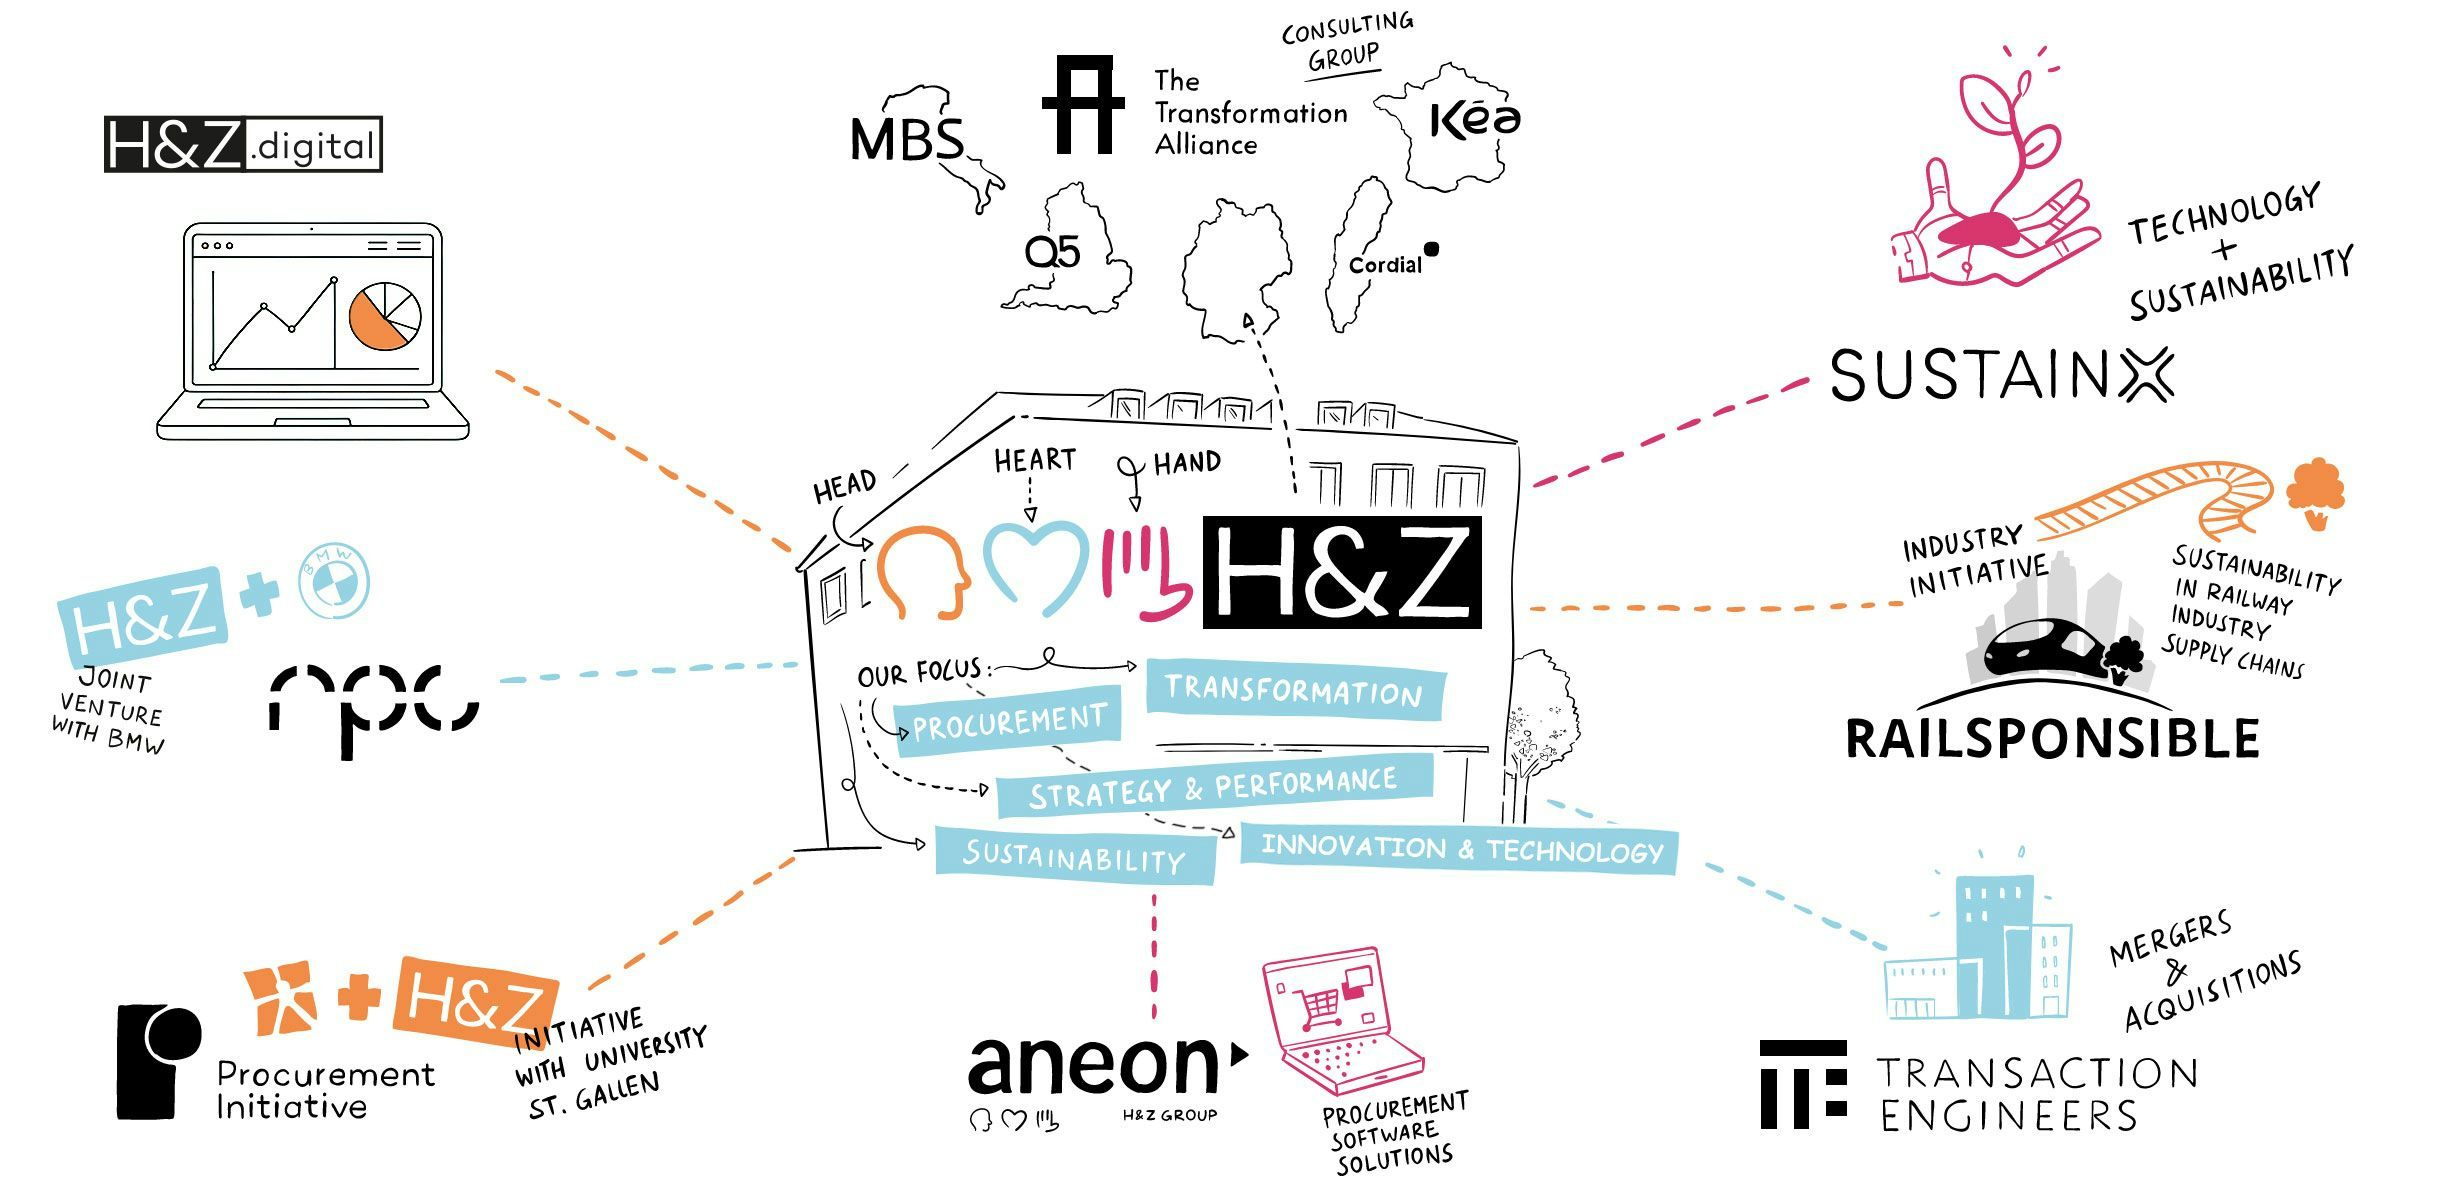 H&Z Company Overview